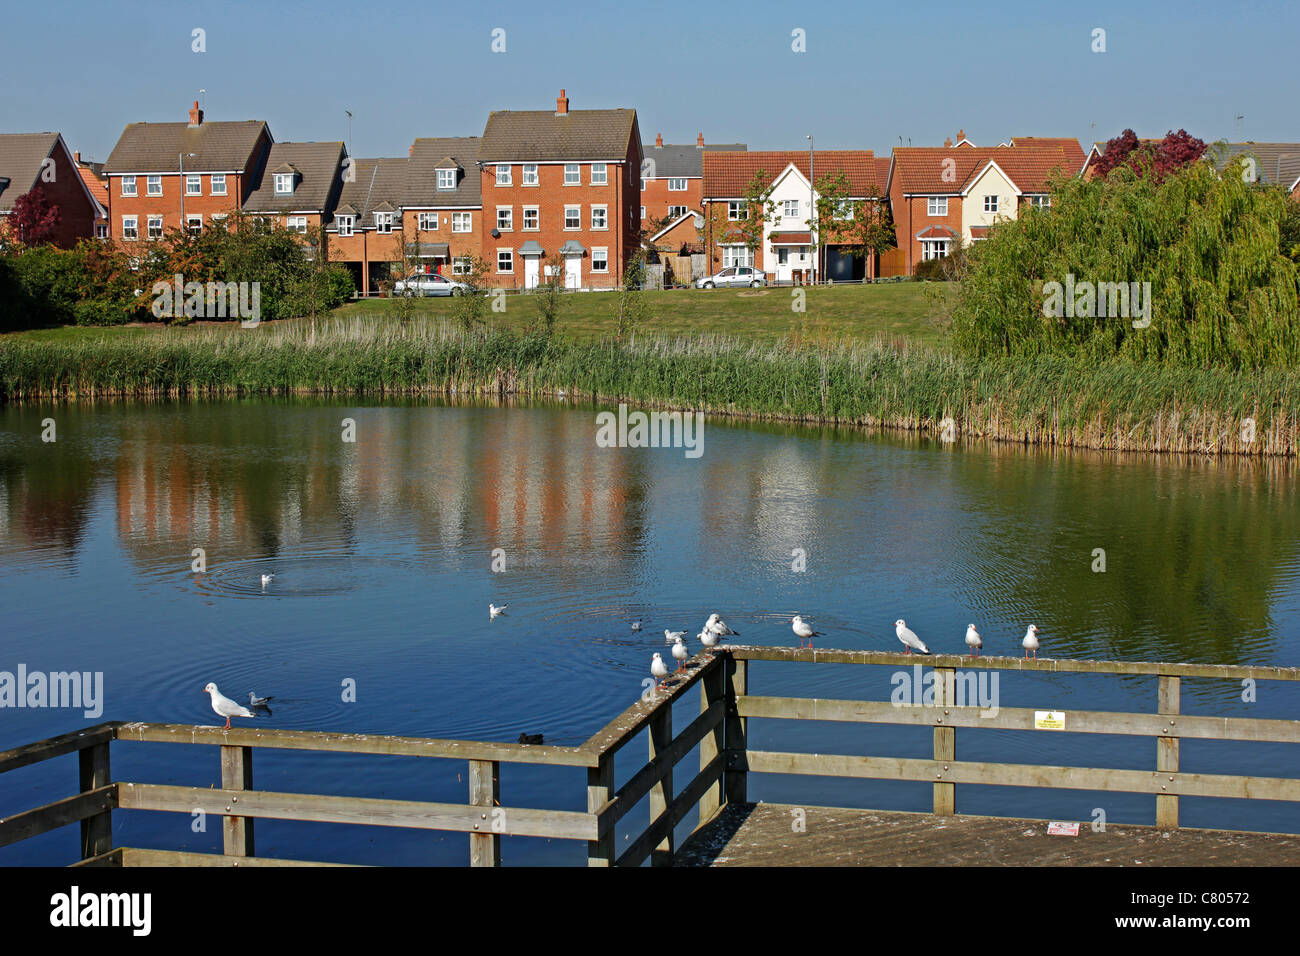 Gulls enjoy a paddle on one of the lakes in the Oakley Vale area of Corby Northamptonshire England Stock Photo